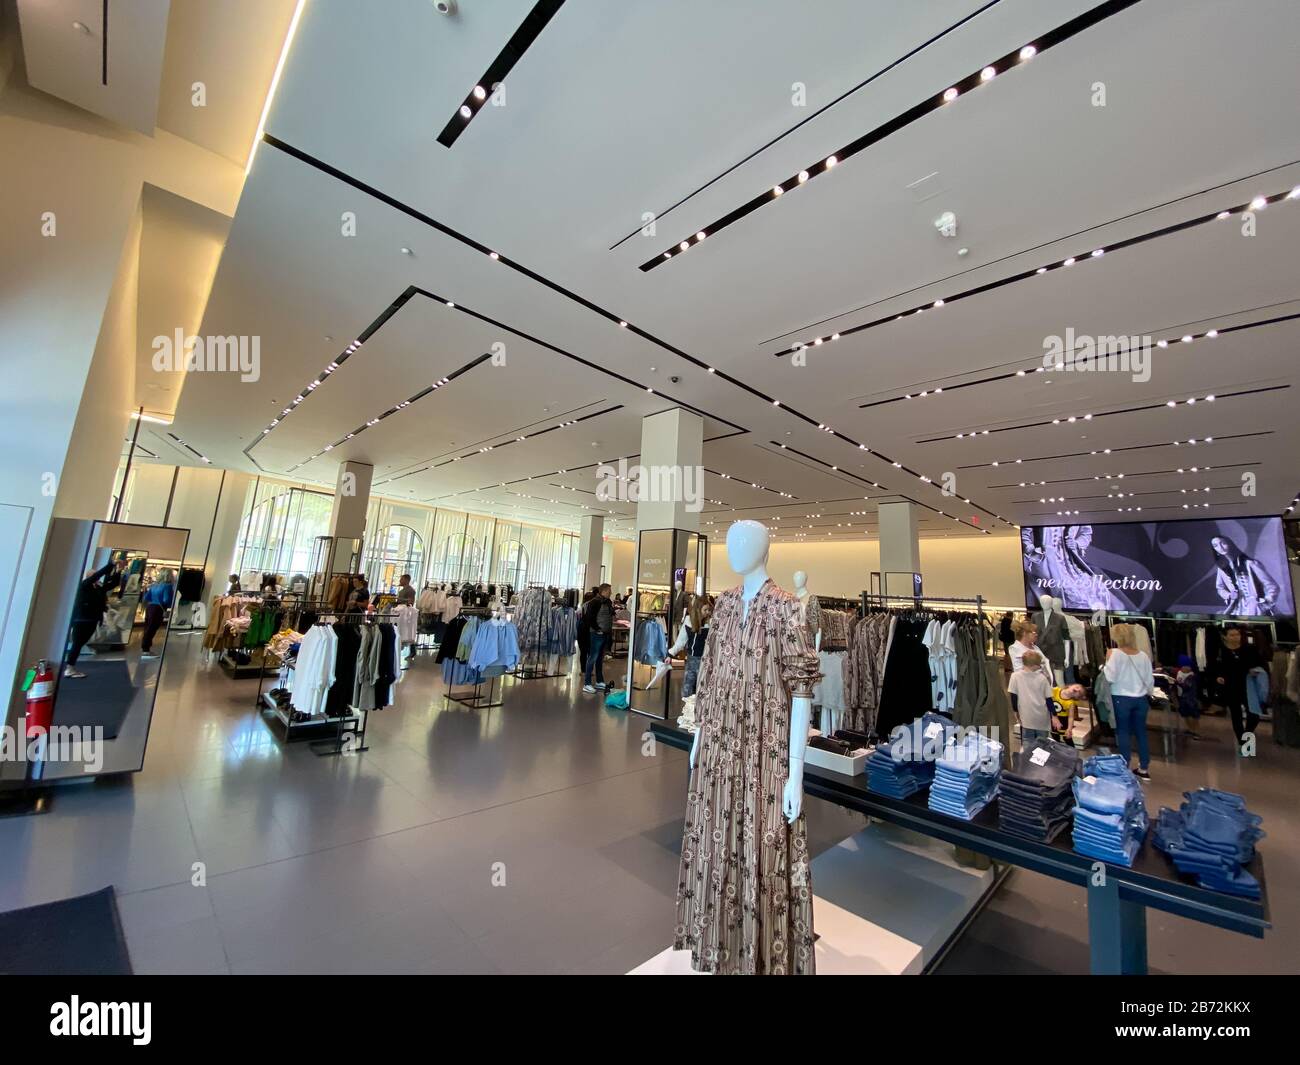 Uniqlo Department Store High Resolution Stock Photography and Images - Alamy